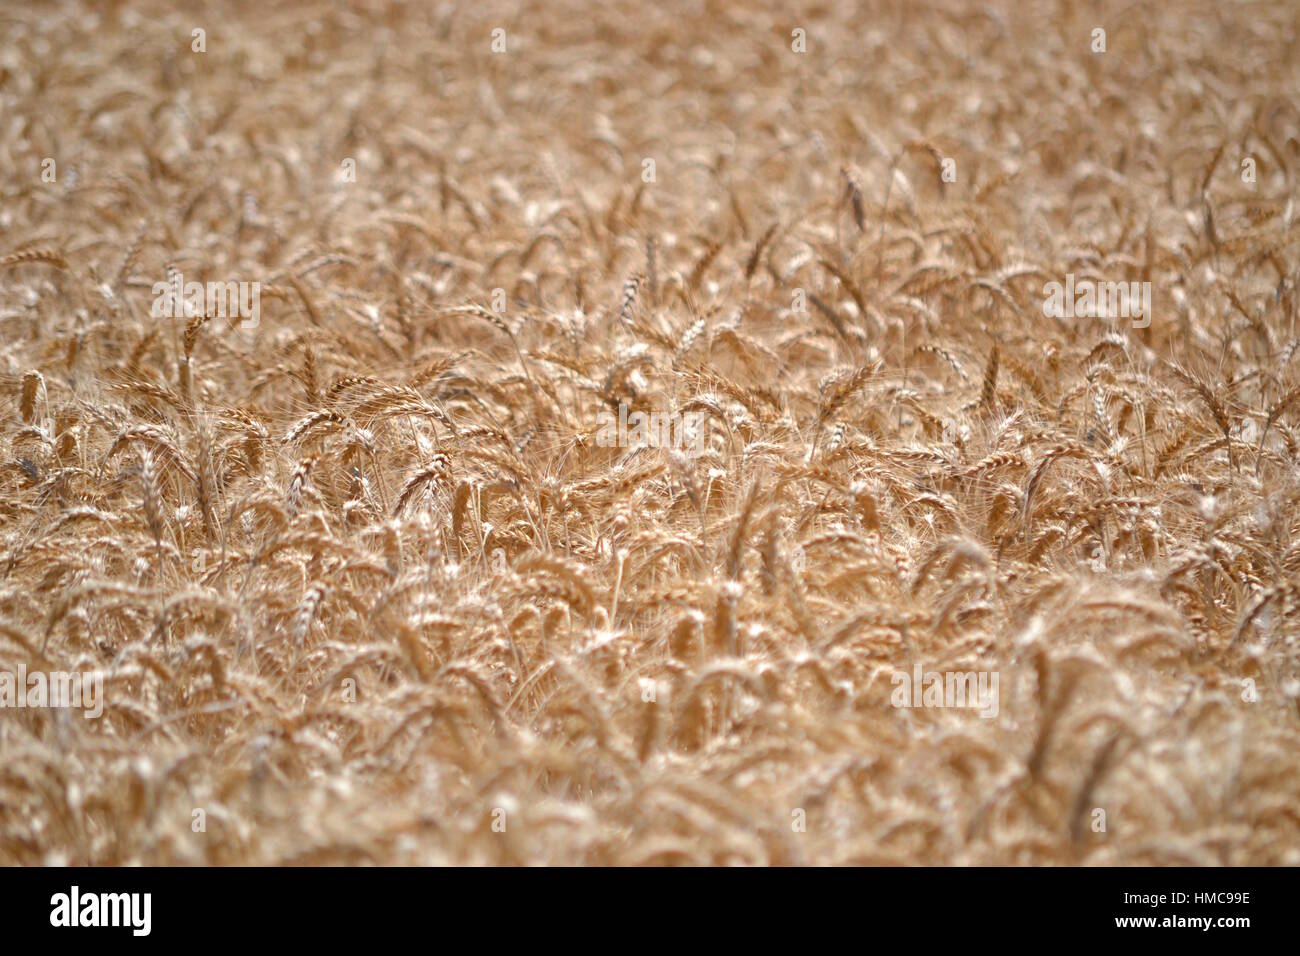 Full frame view of wheat crop ready be harvested in glinting sunlight Stock Photo